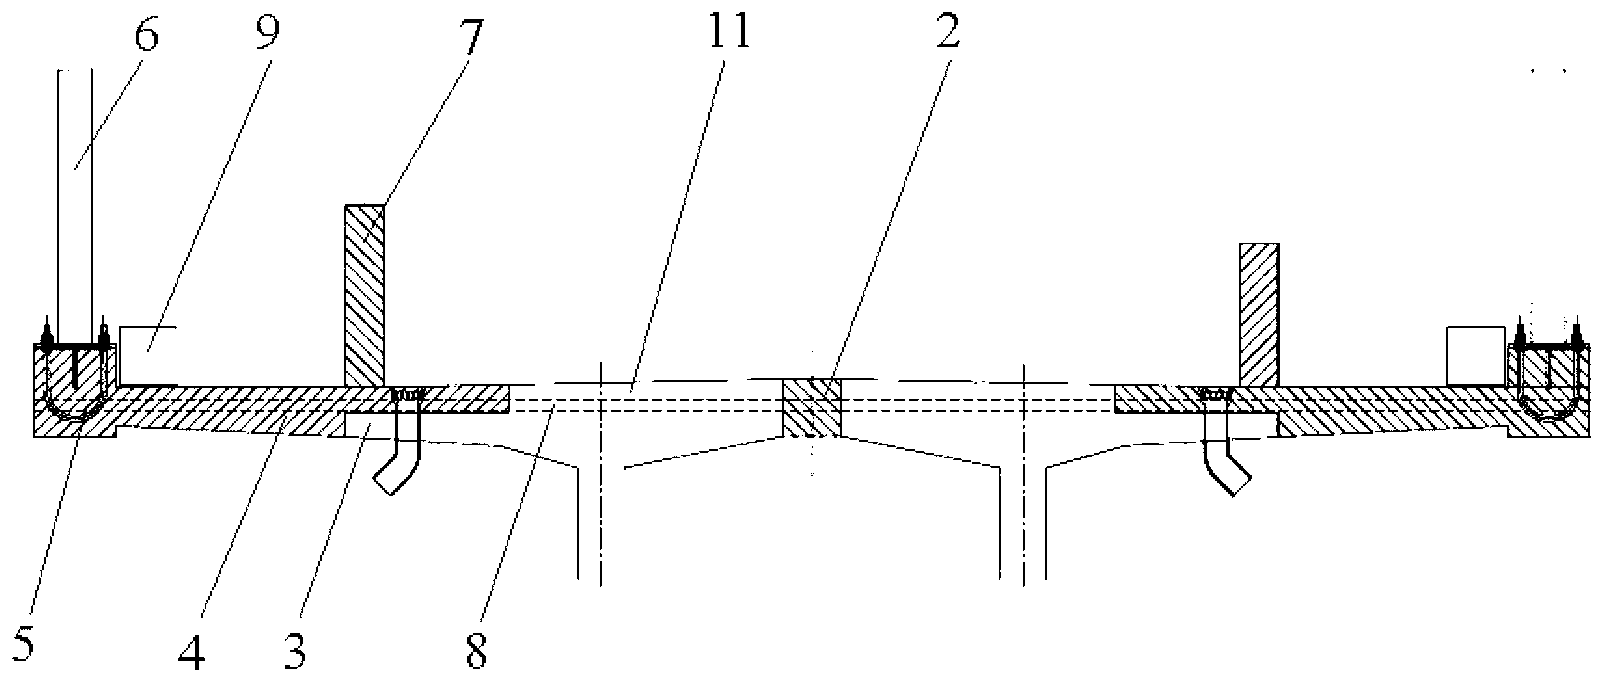 Sound-barrier simply-supported T-beam bridge